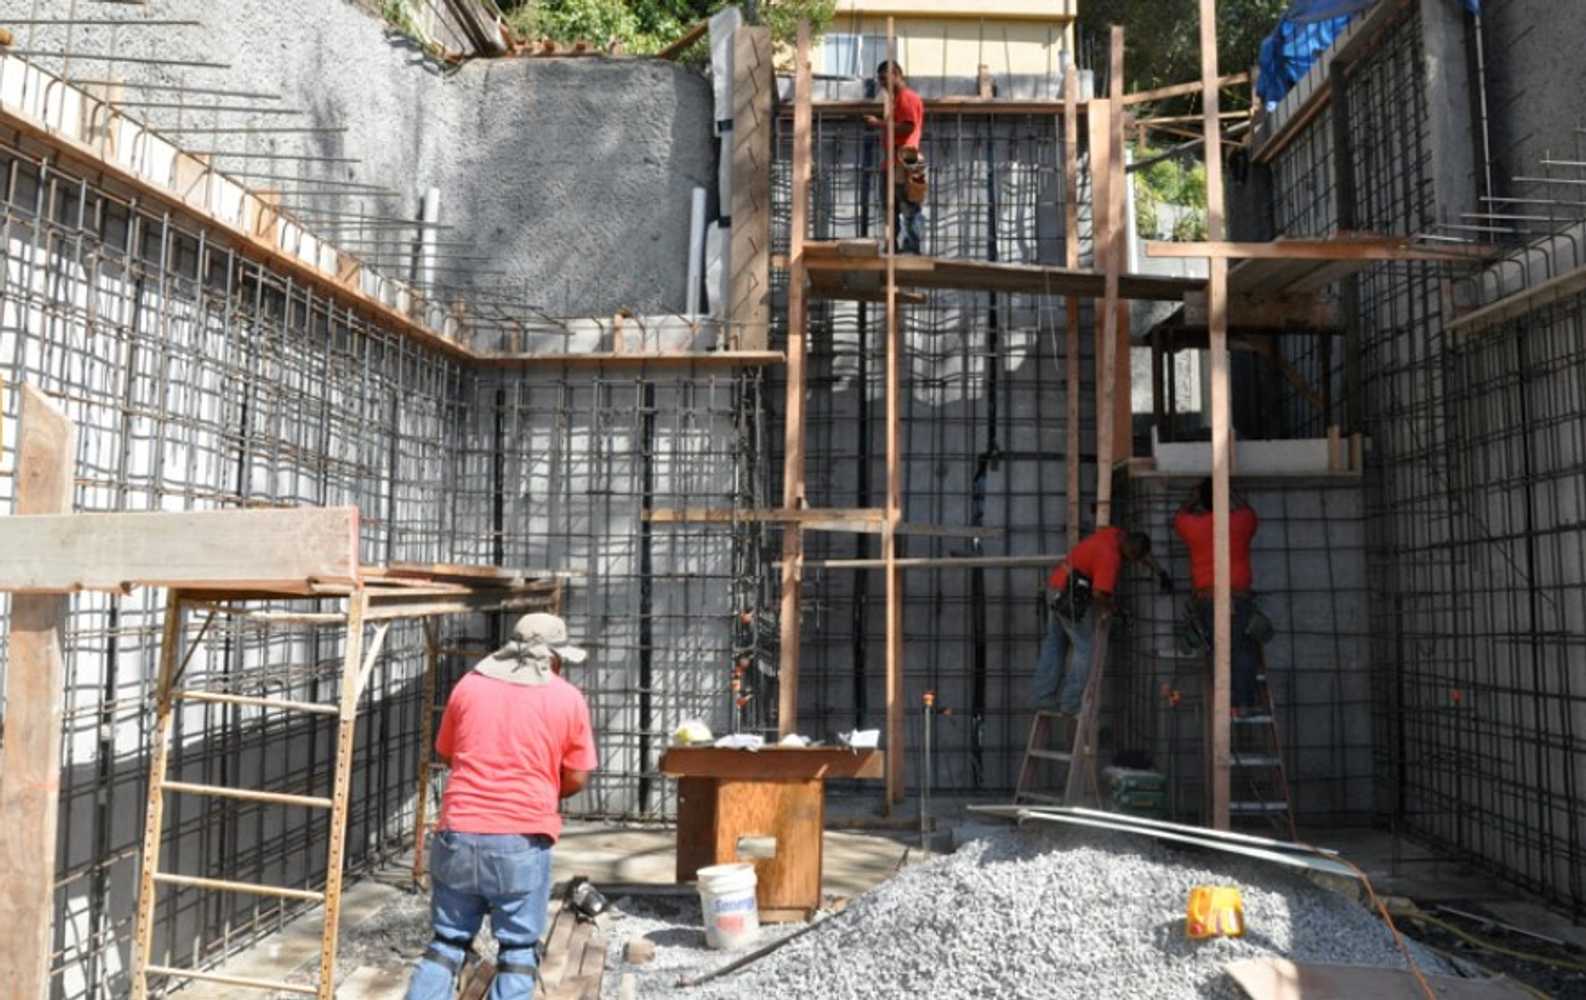 New Foundation (Mill Valley)